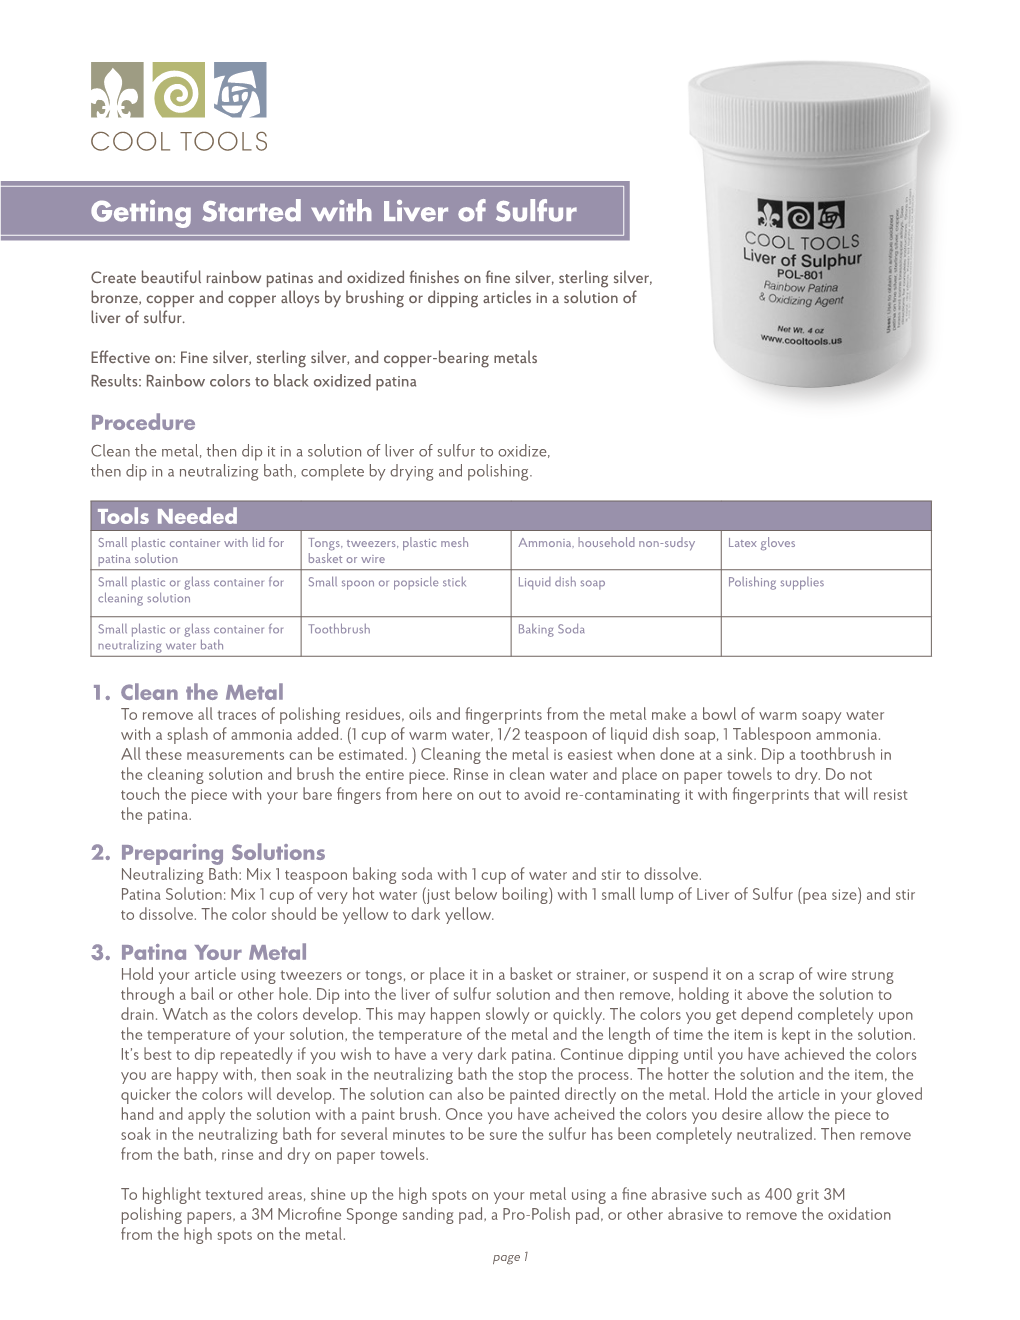 Liver of Sulfur Instructions